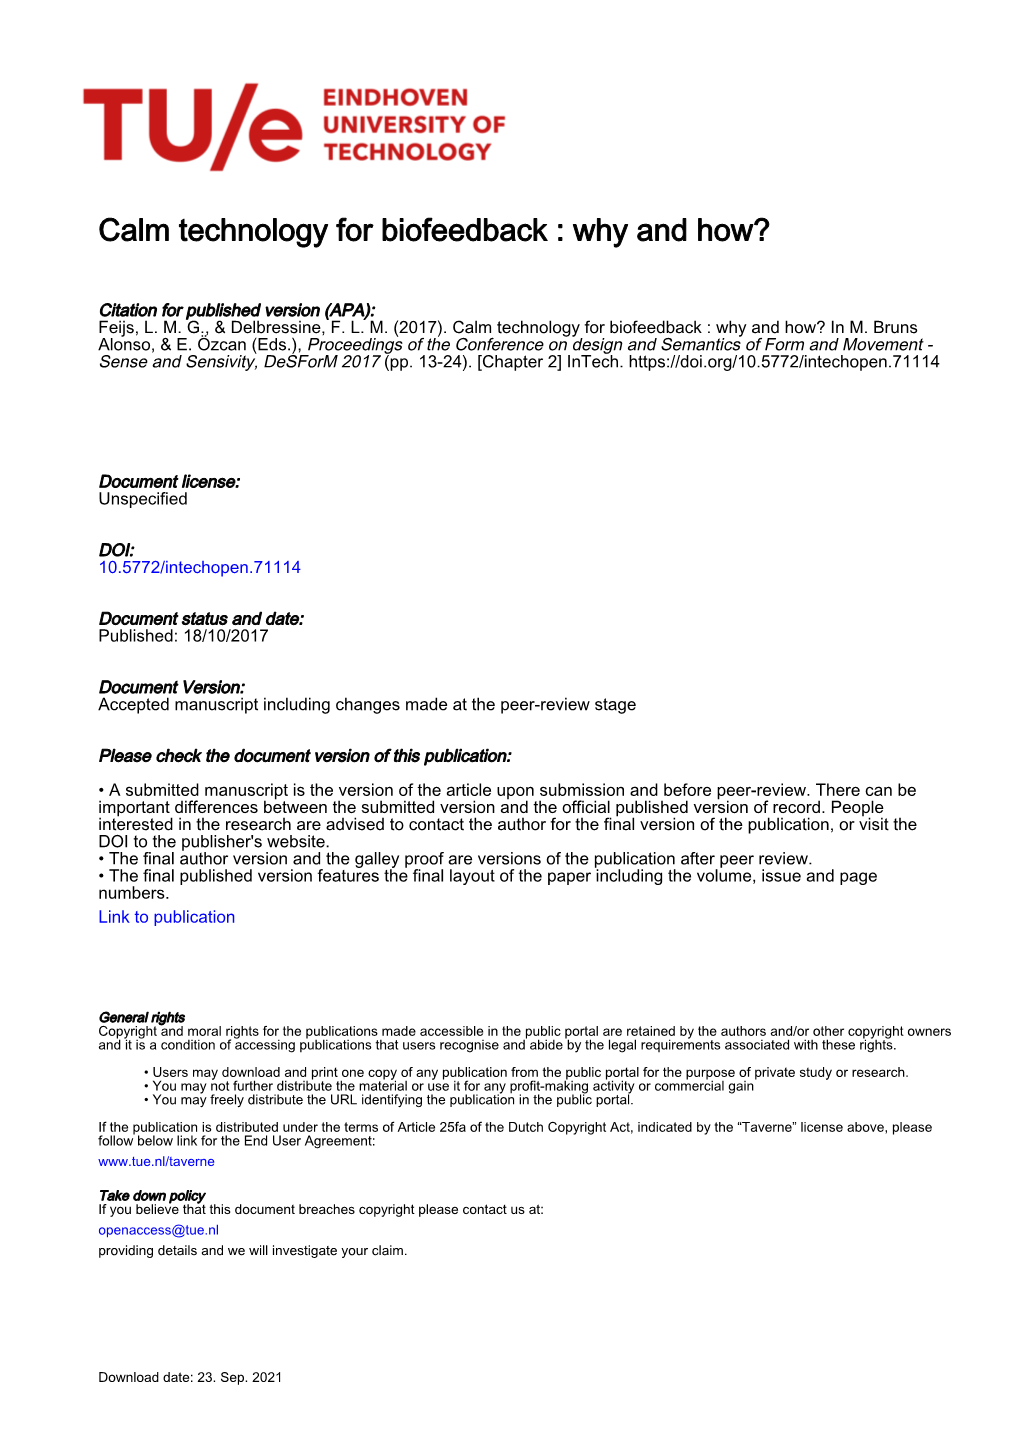 Calm Technology for Biofeedback : Why and How?